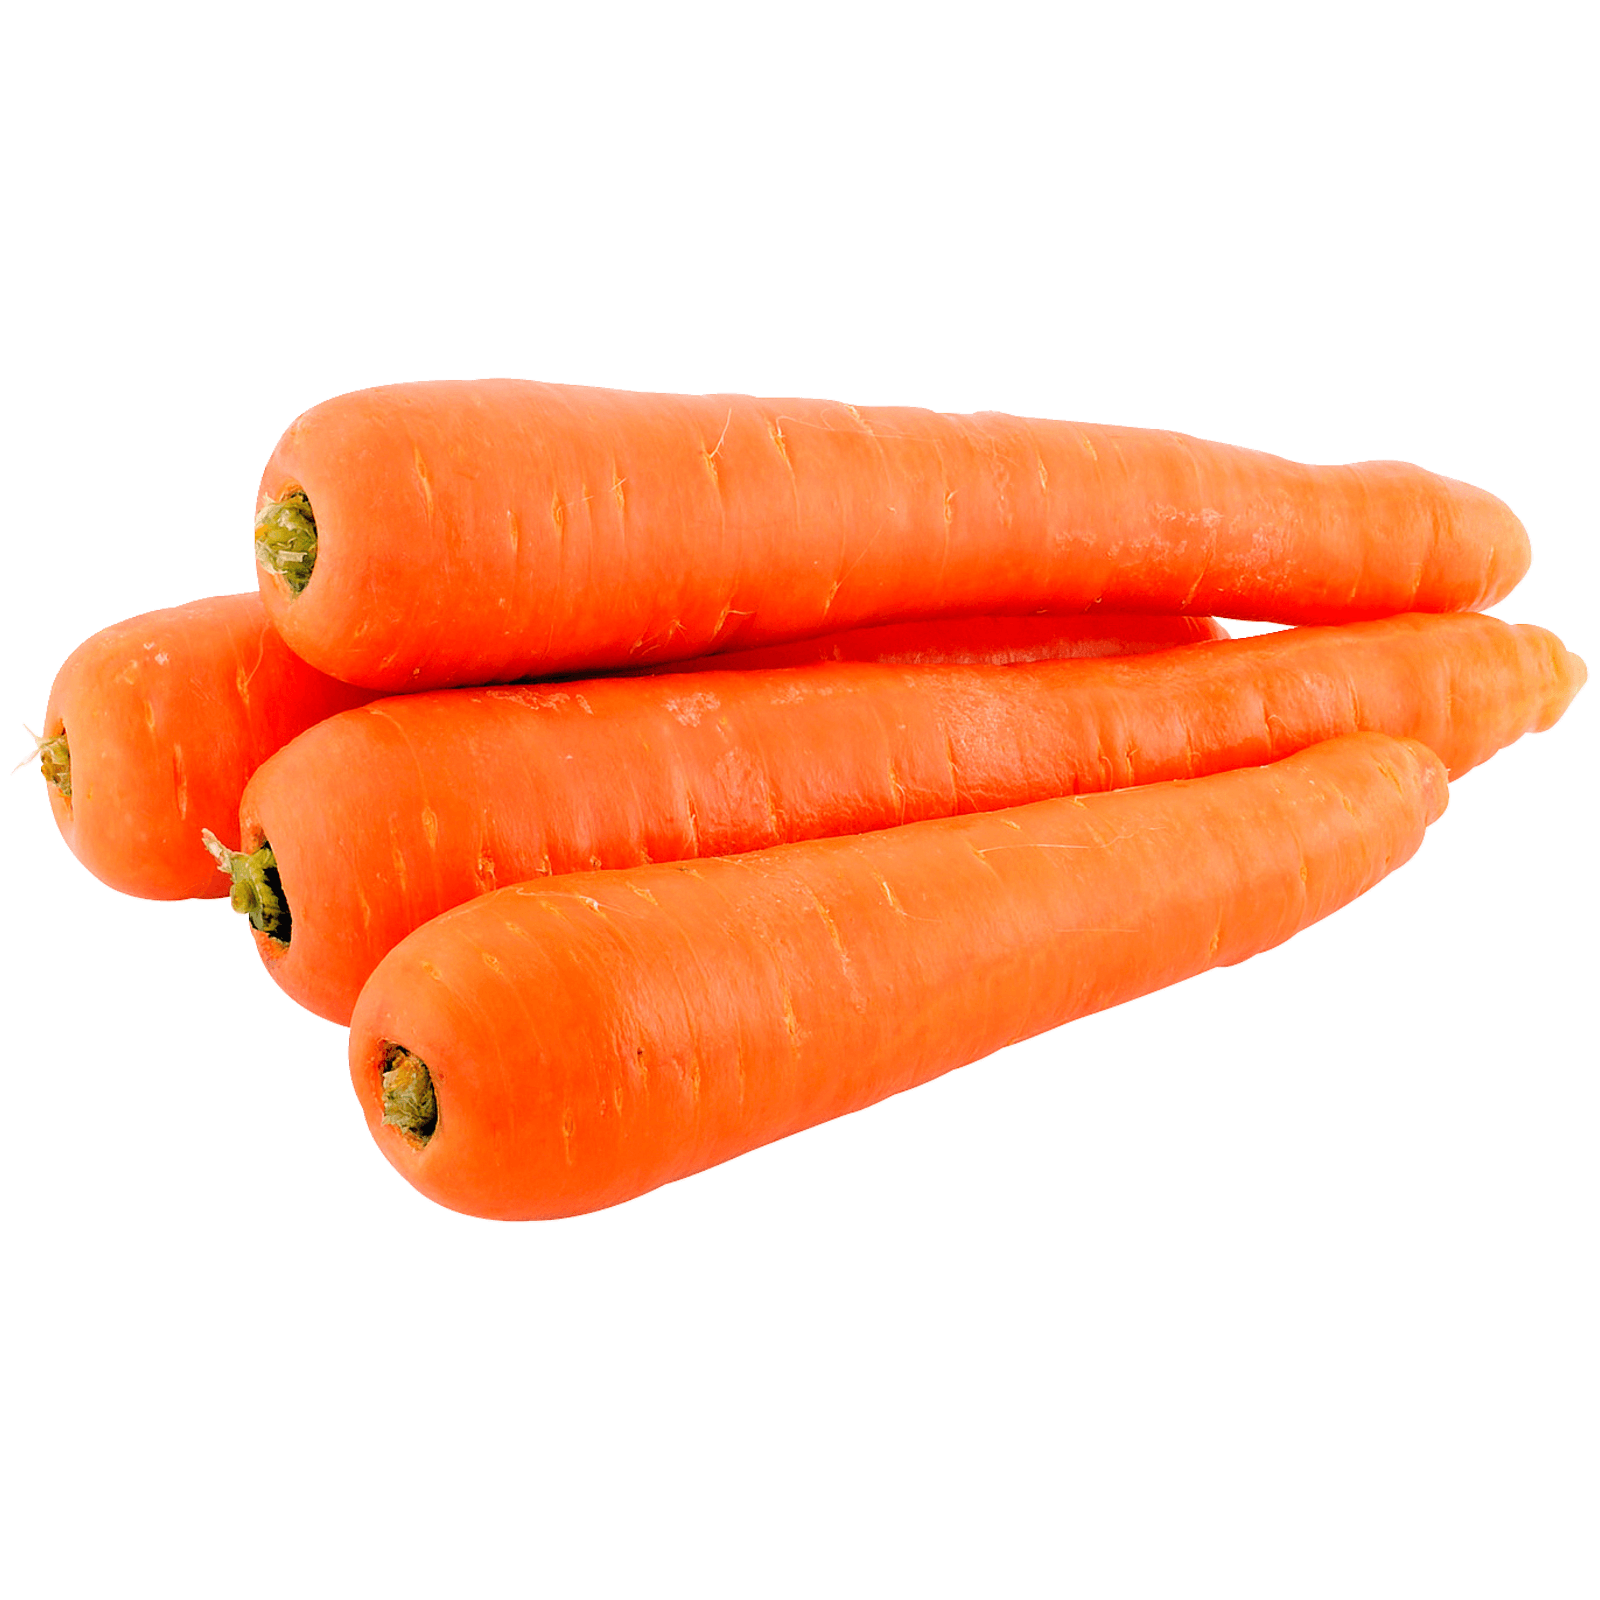 Carrot Vegetable Health Food Nutrition - carrots png download - 1600* ...